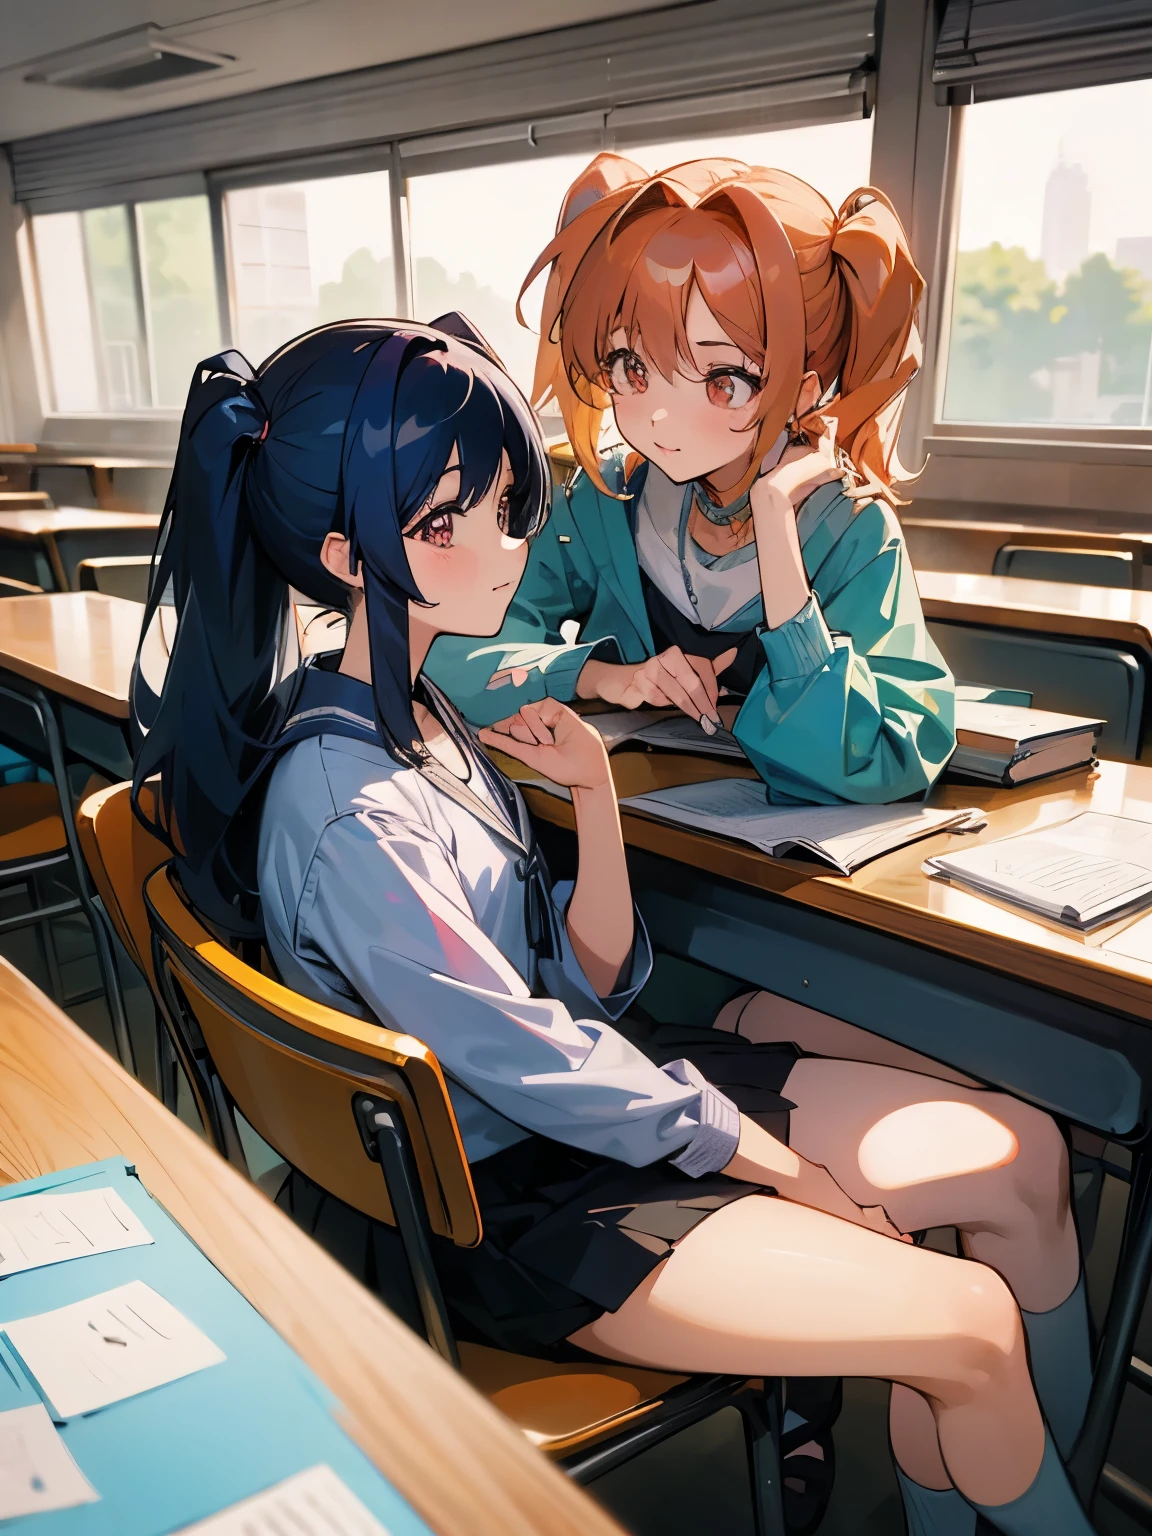 cartoon of two girls sitting at a table with a book and a backpack, an anime drawing by Naka Bokunen, tumblr, happening, ddlc, in the art style of 8 0 s anime, 9 0 s anime style, 90s anime style, in anime style, in an anime style, anime aesthetic, anime vibes, 9 0 s anime aesthetic, classic classroom with beautiful background window, beautiful girls sitting on his own desks, talking to each other, the first girl has golden hair, the second girl has black hair 